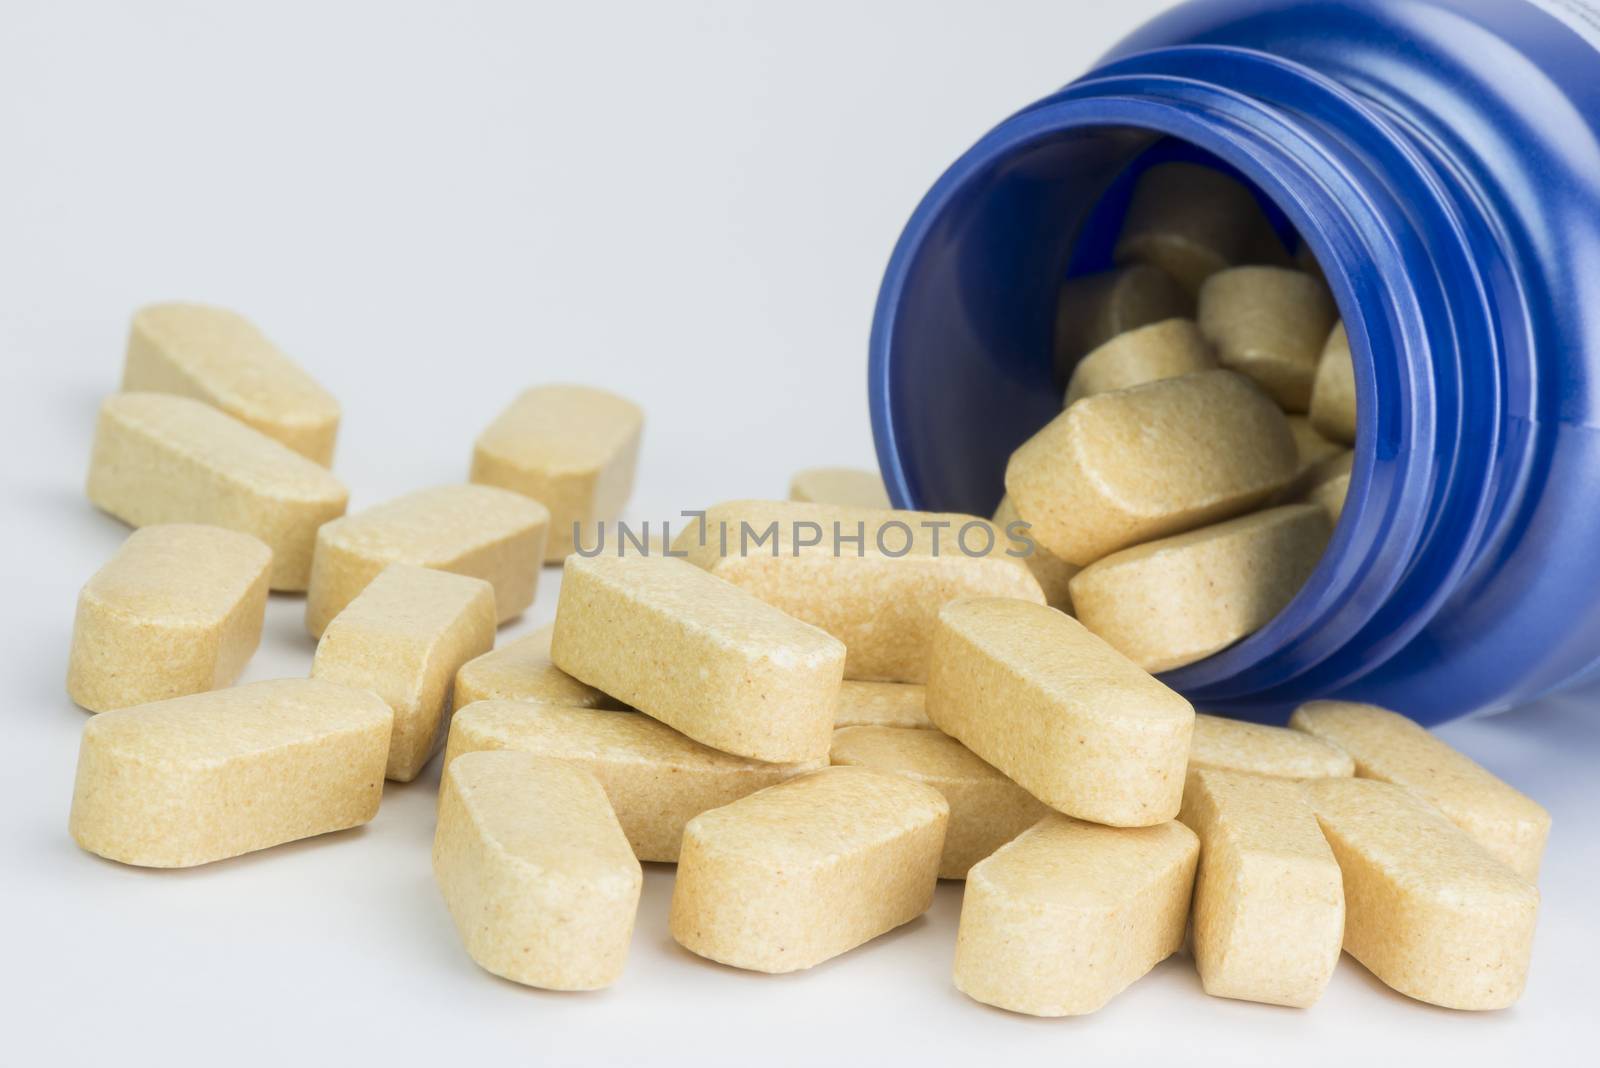 Collection yellow tablets from a fallen blue medicine jar
